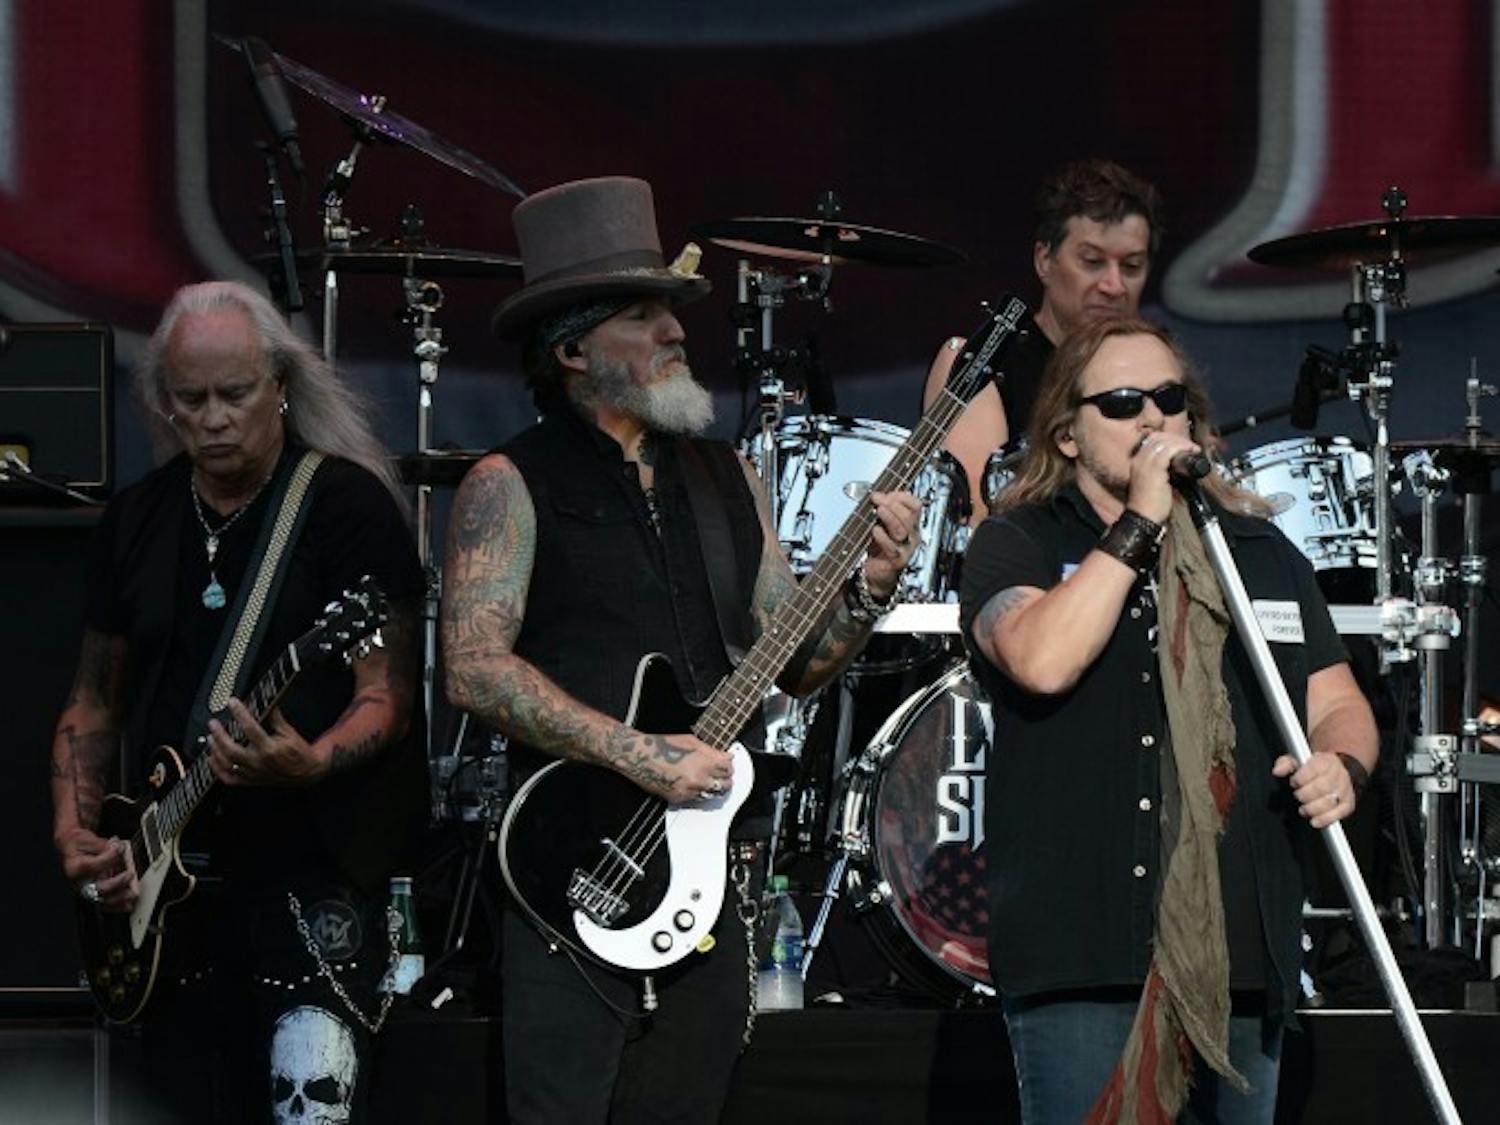 Lynyrd Skynyrd performs at Music and Miracles Superfest on Saturday, April 22, 2017 at Jordan-Hare Stadium in Auburn, Ala.